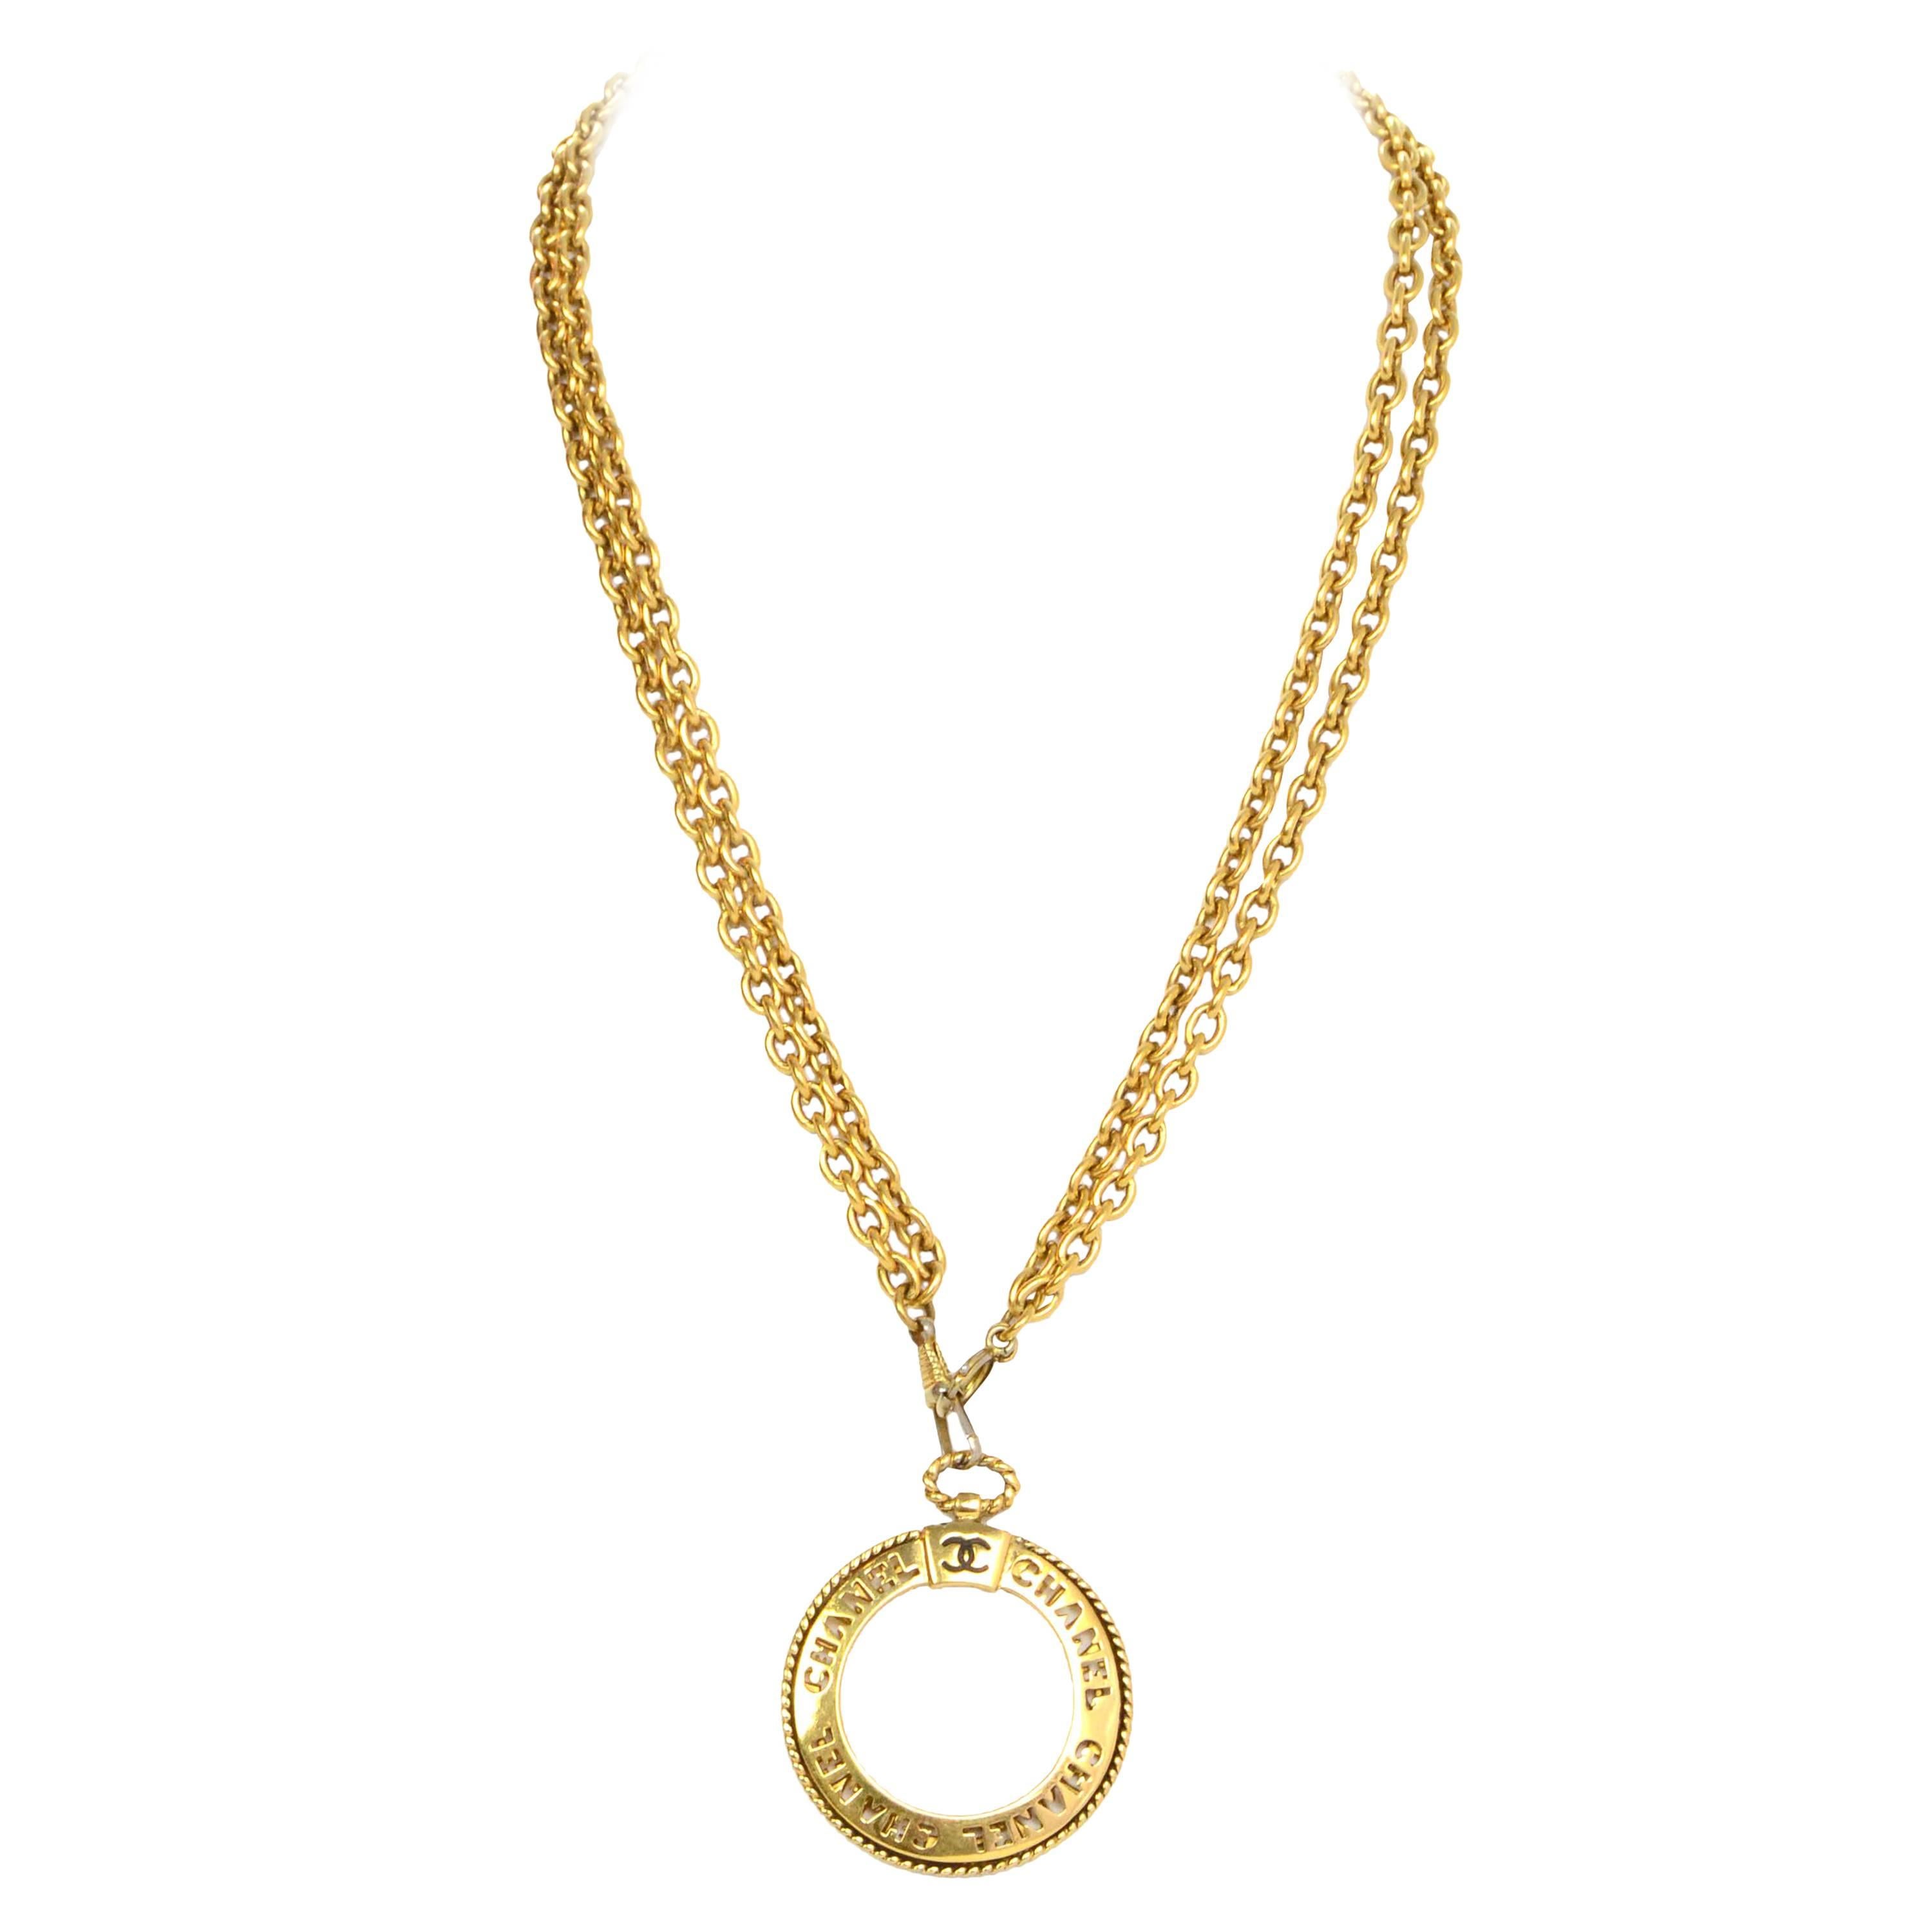 Chanel Vintage ‘70s-‘80s Double Chain Link Magnifying Glass Necklace